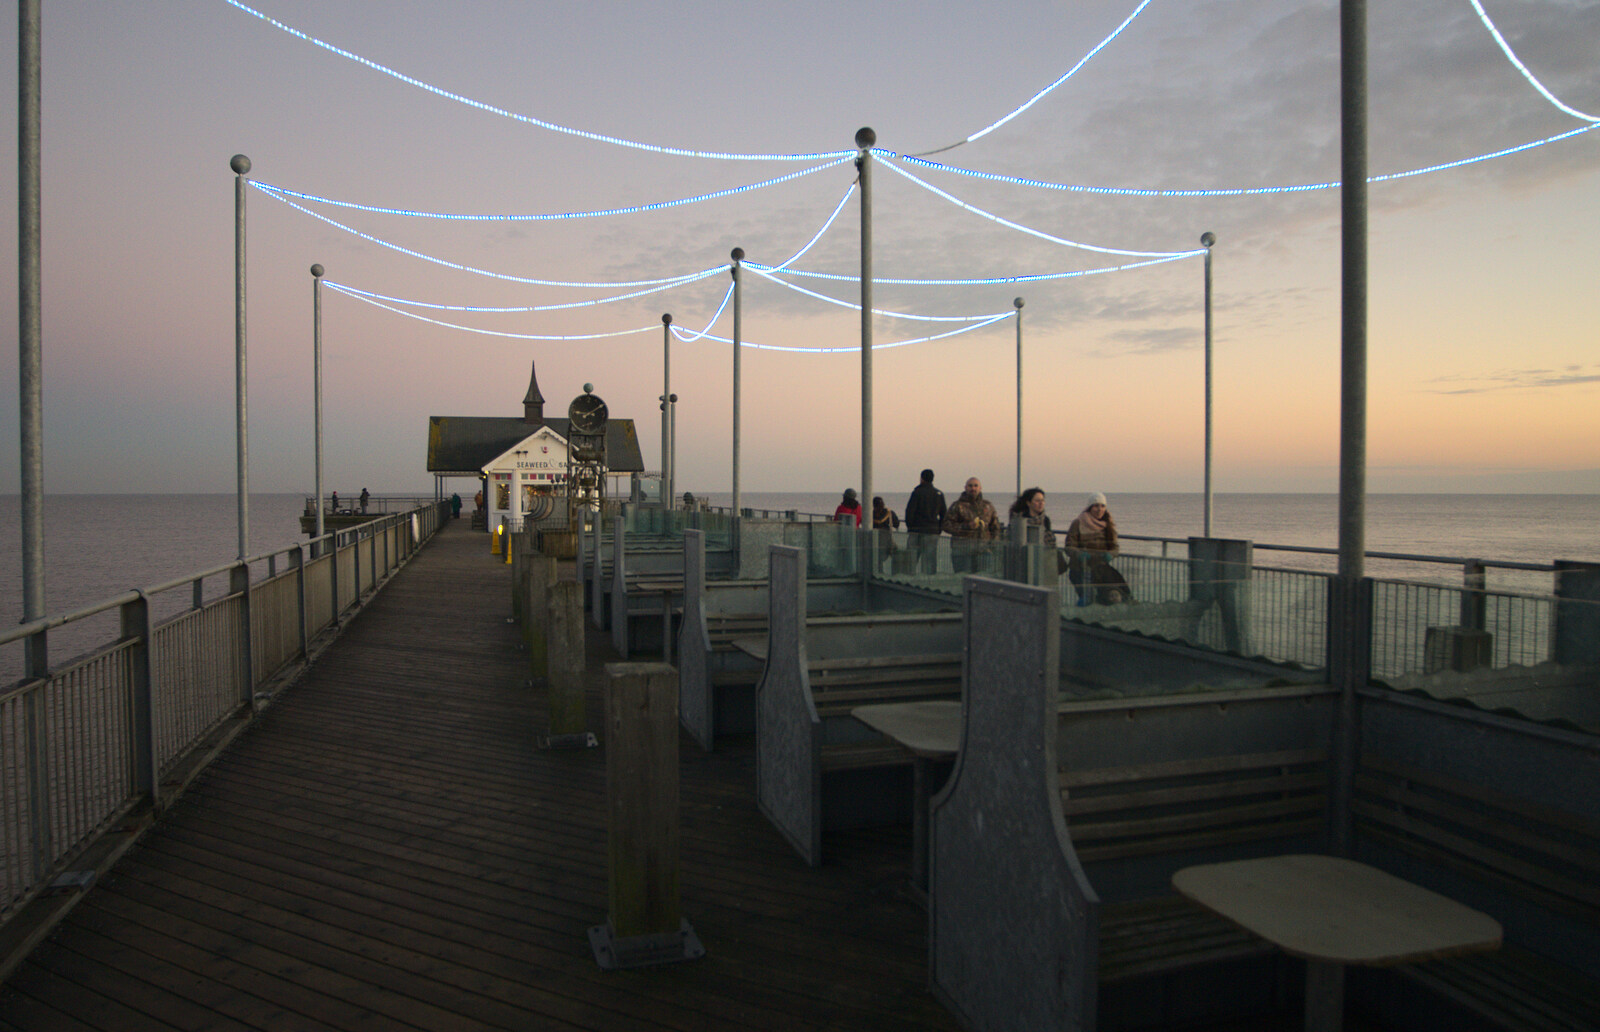 Light-ropes are turned on, on the pier from Sunset on the Beach, Southwold, Suffolk - 30th December 2014